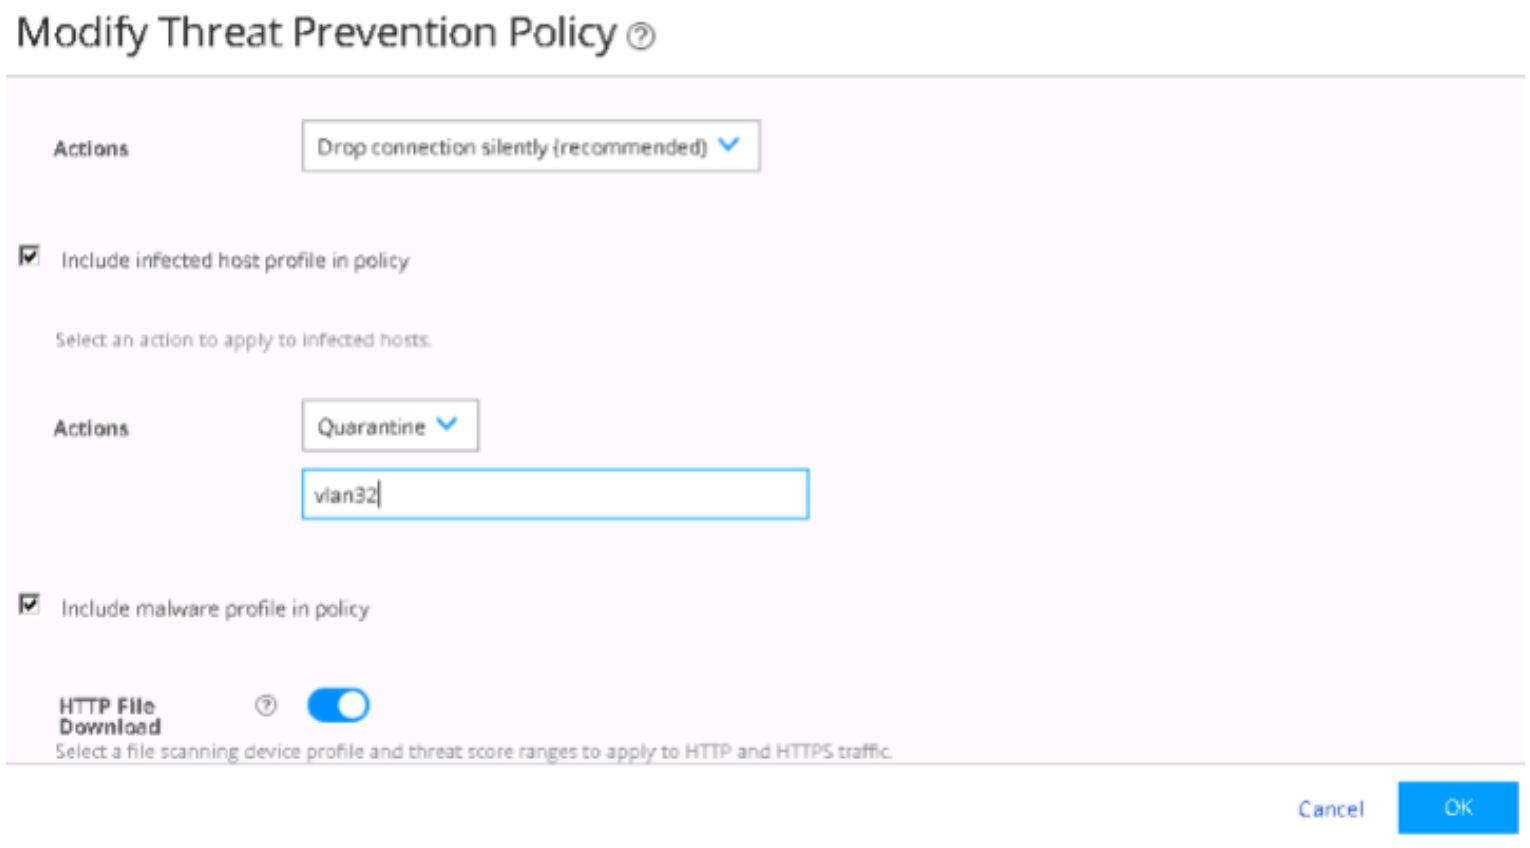 Changing Threat Prevention Policy to Quarantine